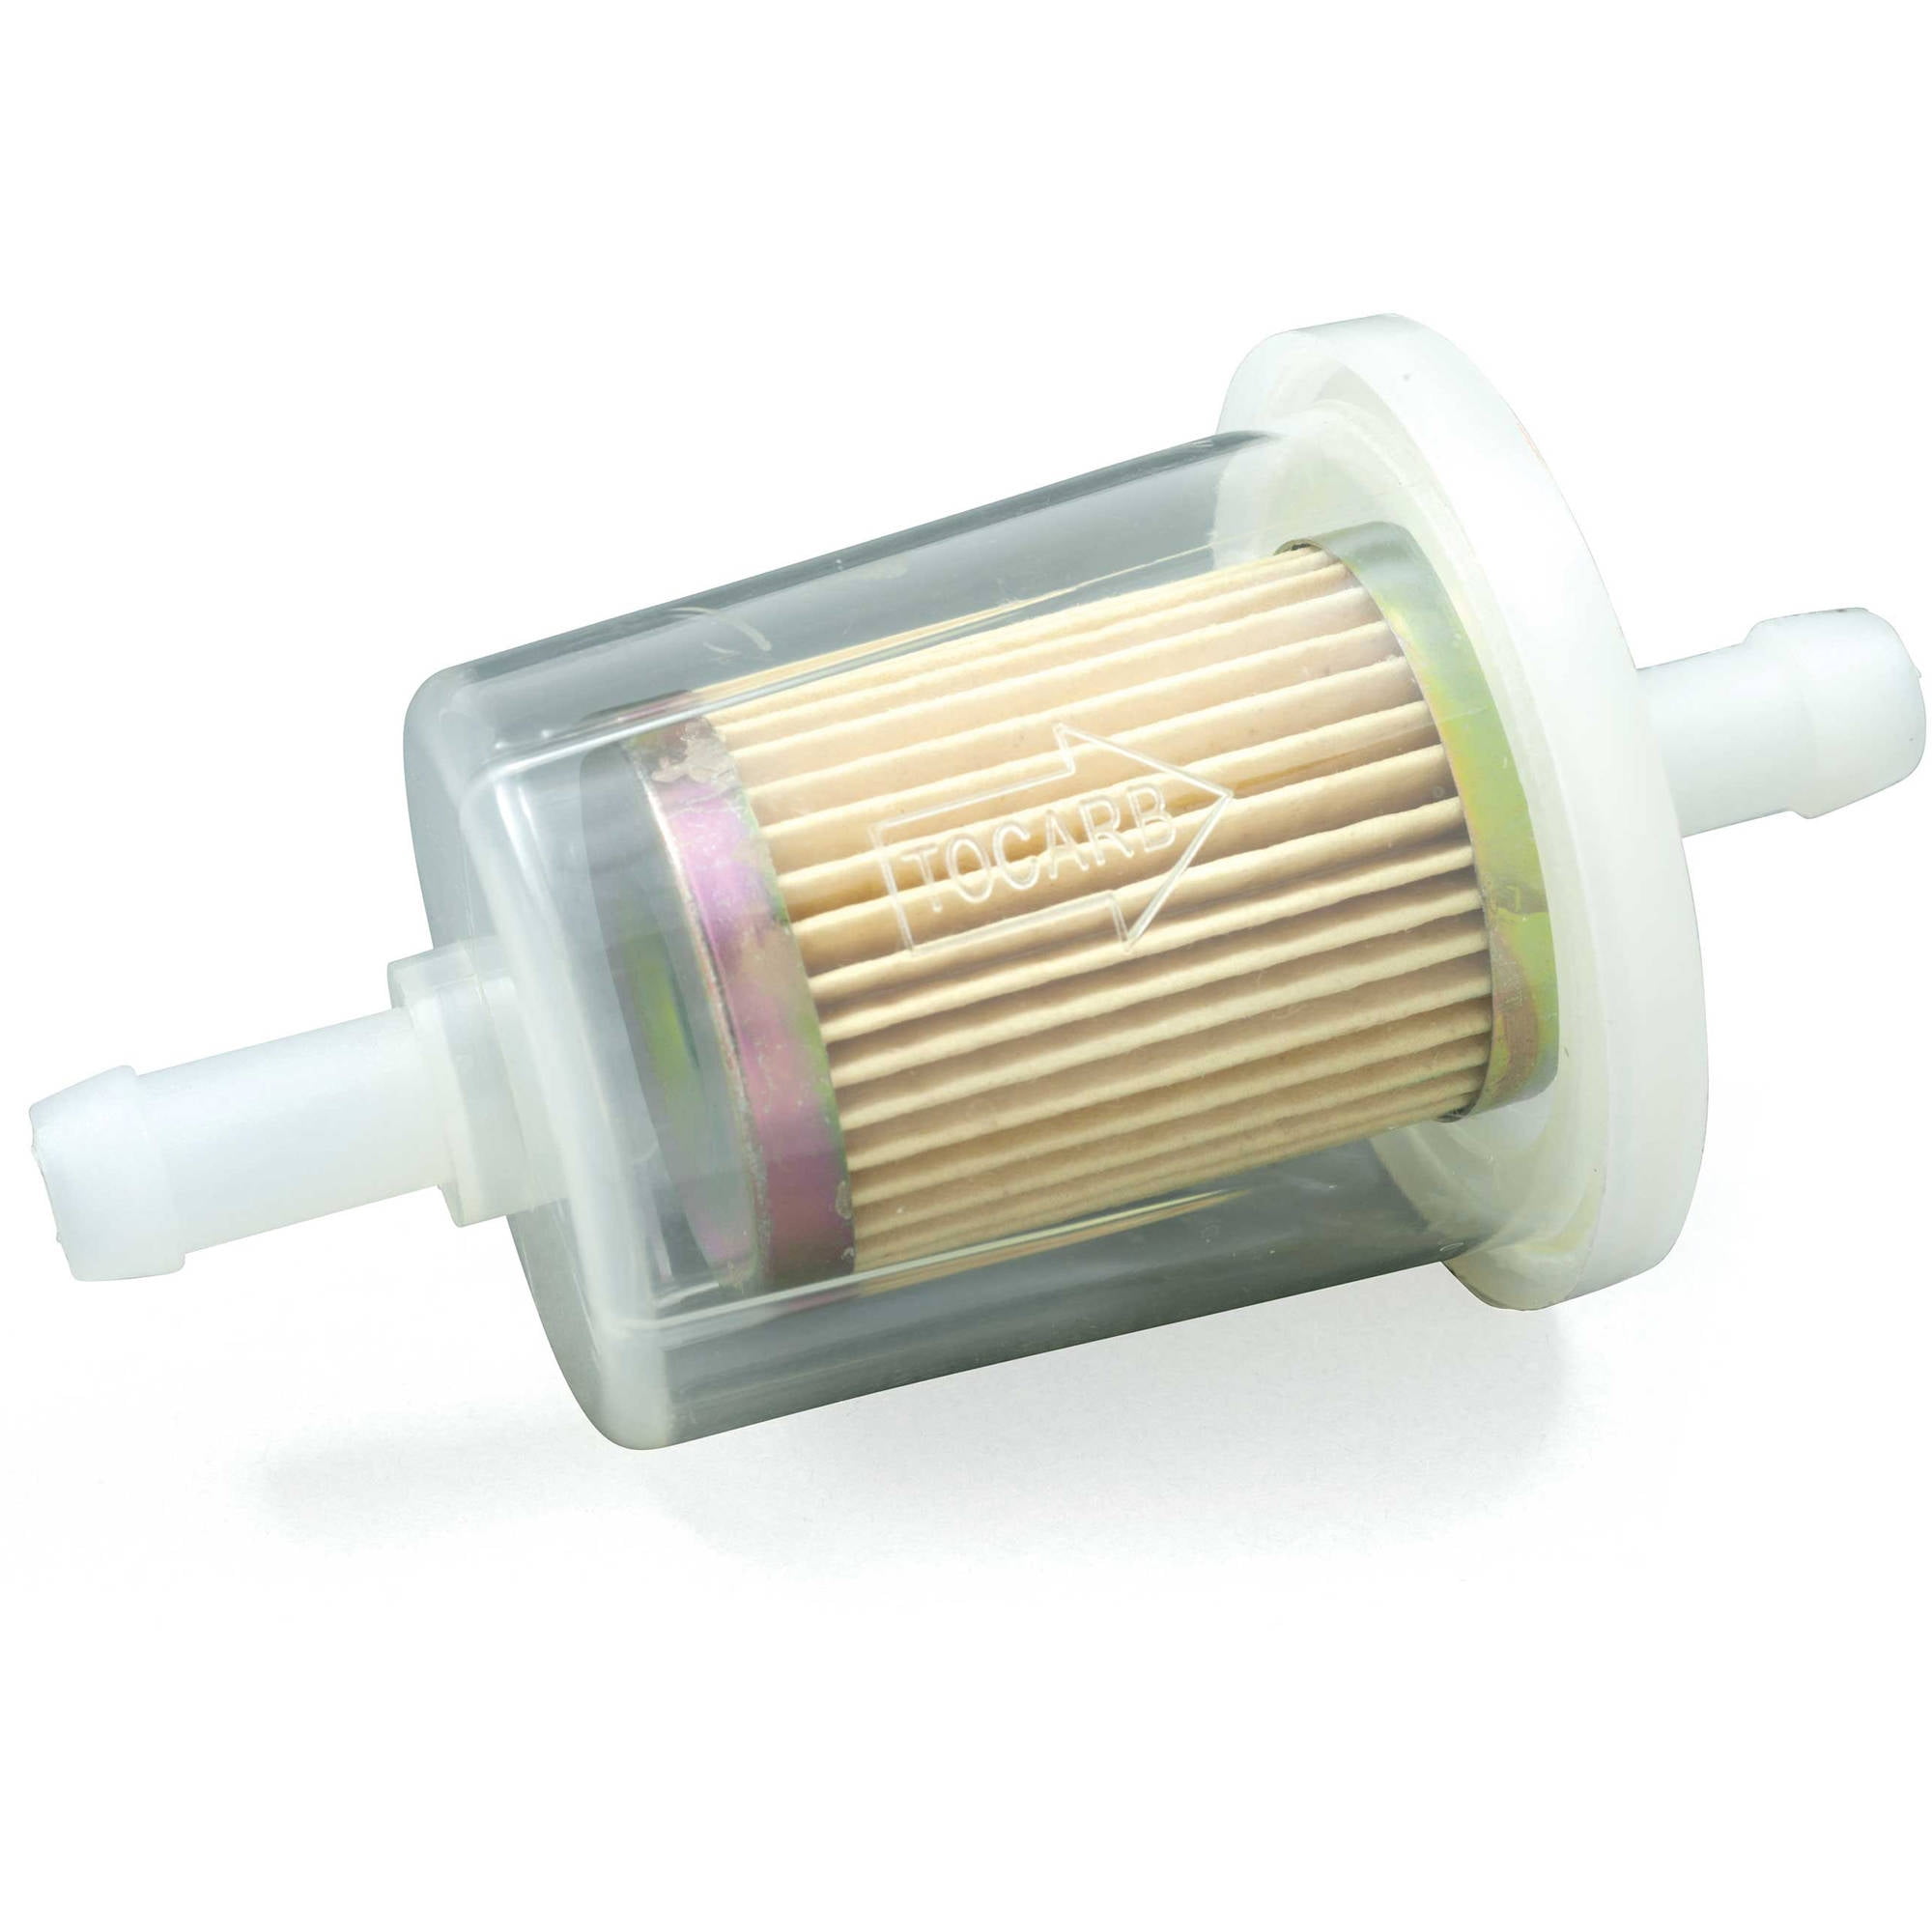 Scepter, 07480, in Line Fuel Filter. Color Clear. Assembled Product  Height'. 6.19 6.19 tall